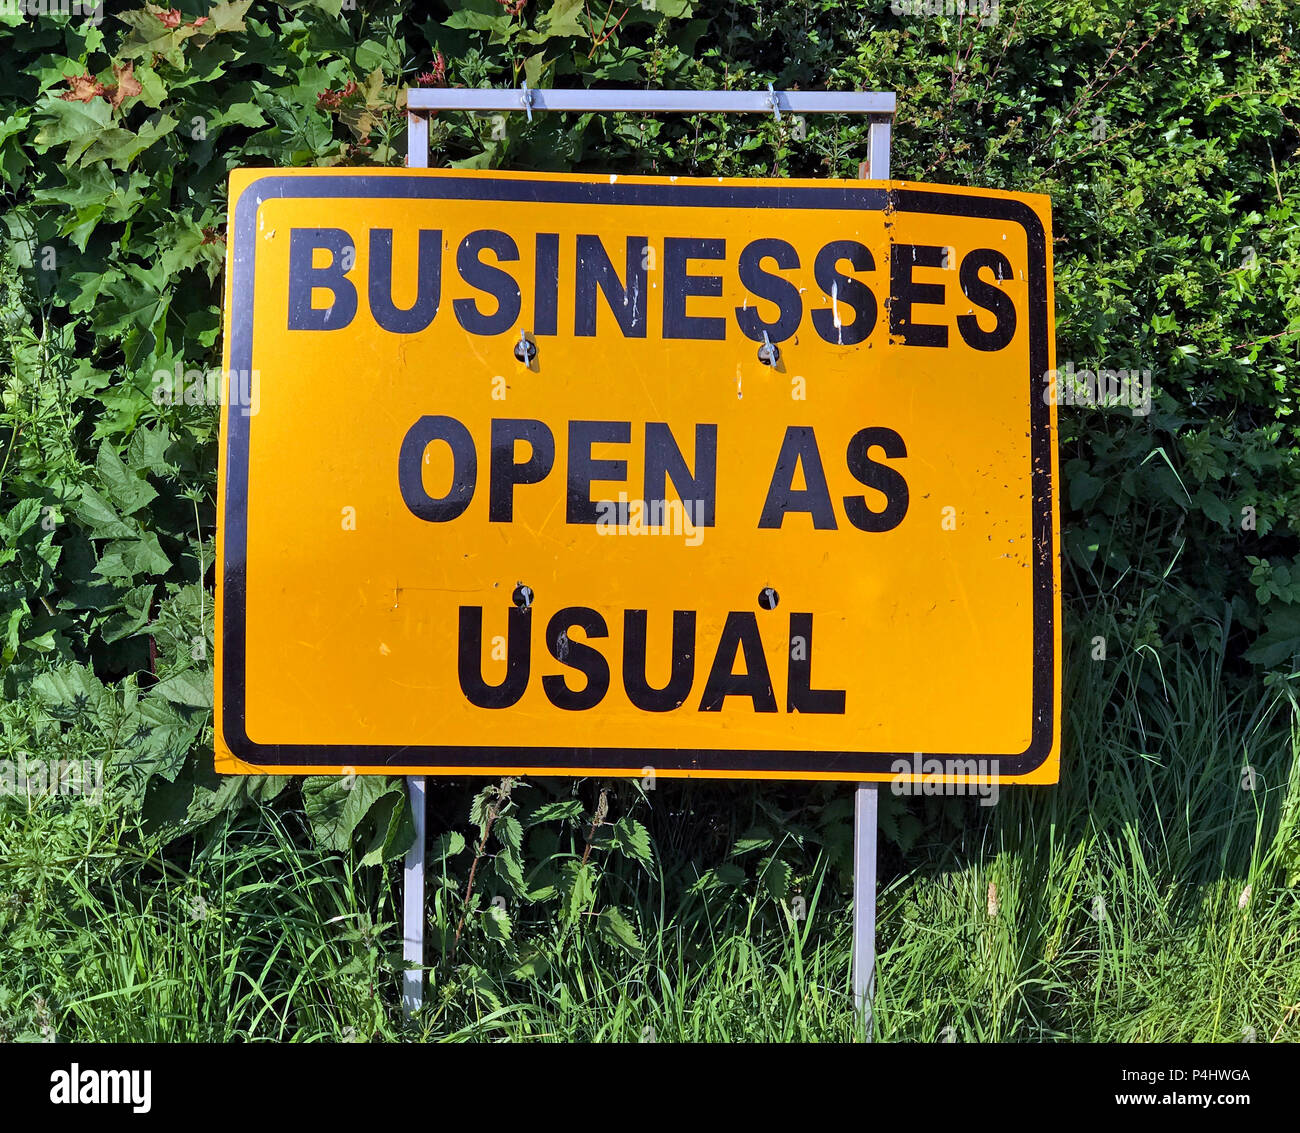 Business Open As Usual,- Businesses Open as usual, yellow traffic road sign Stock Photo